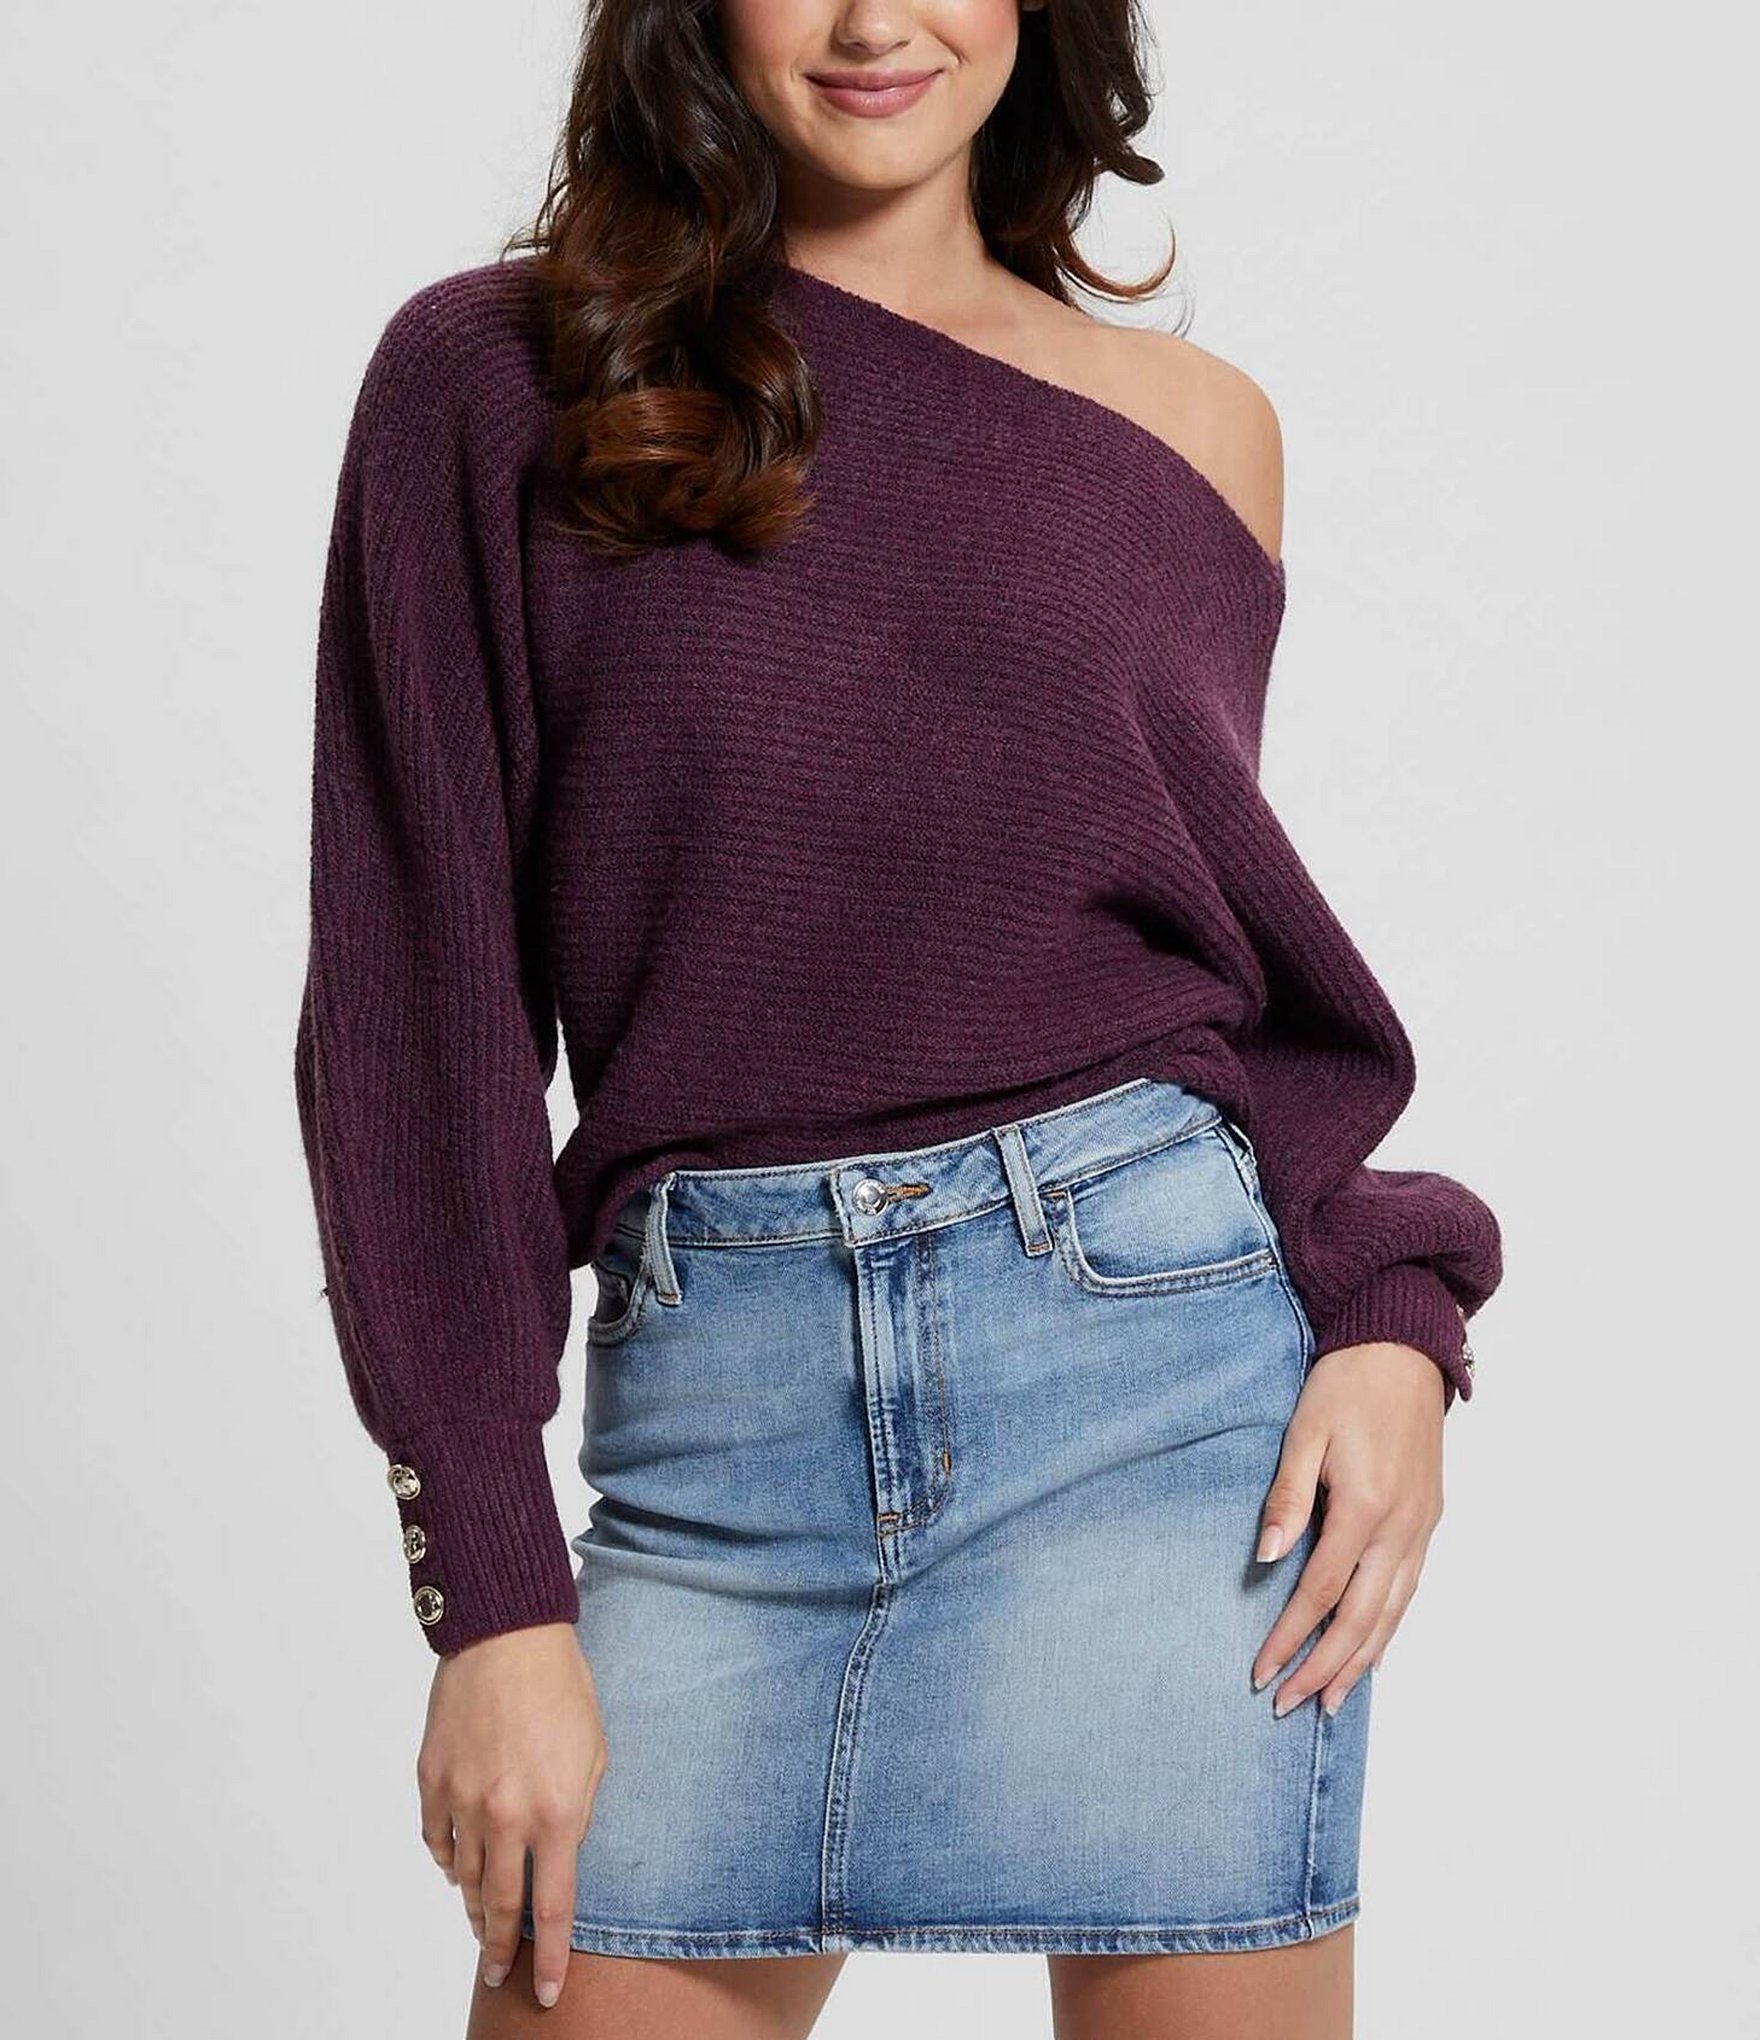 Guess Isadora Off-The-Shoulder Button Cuff Sweater